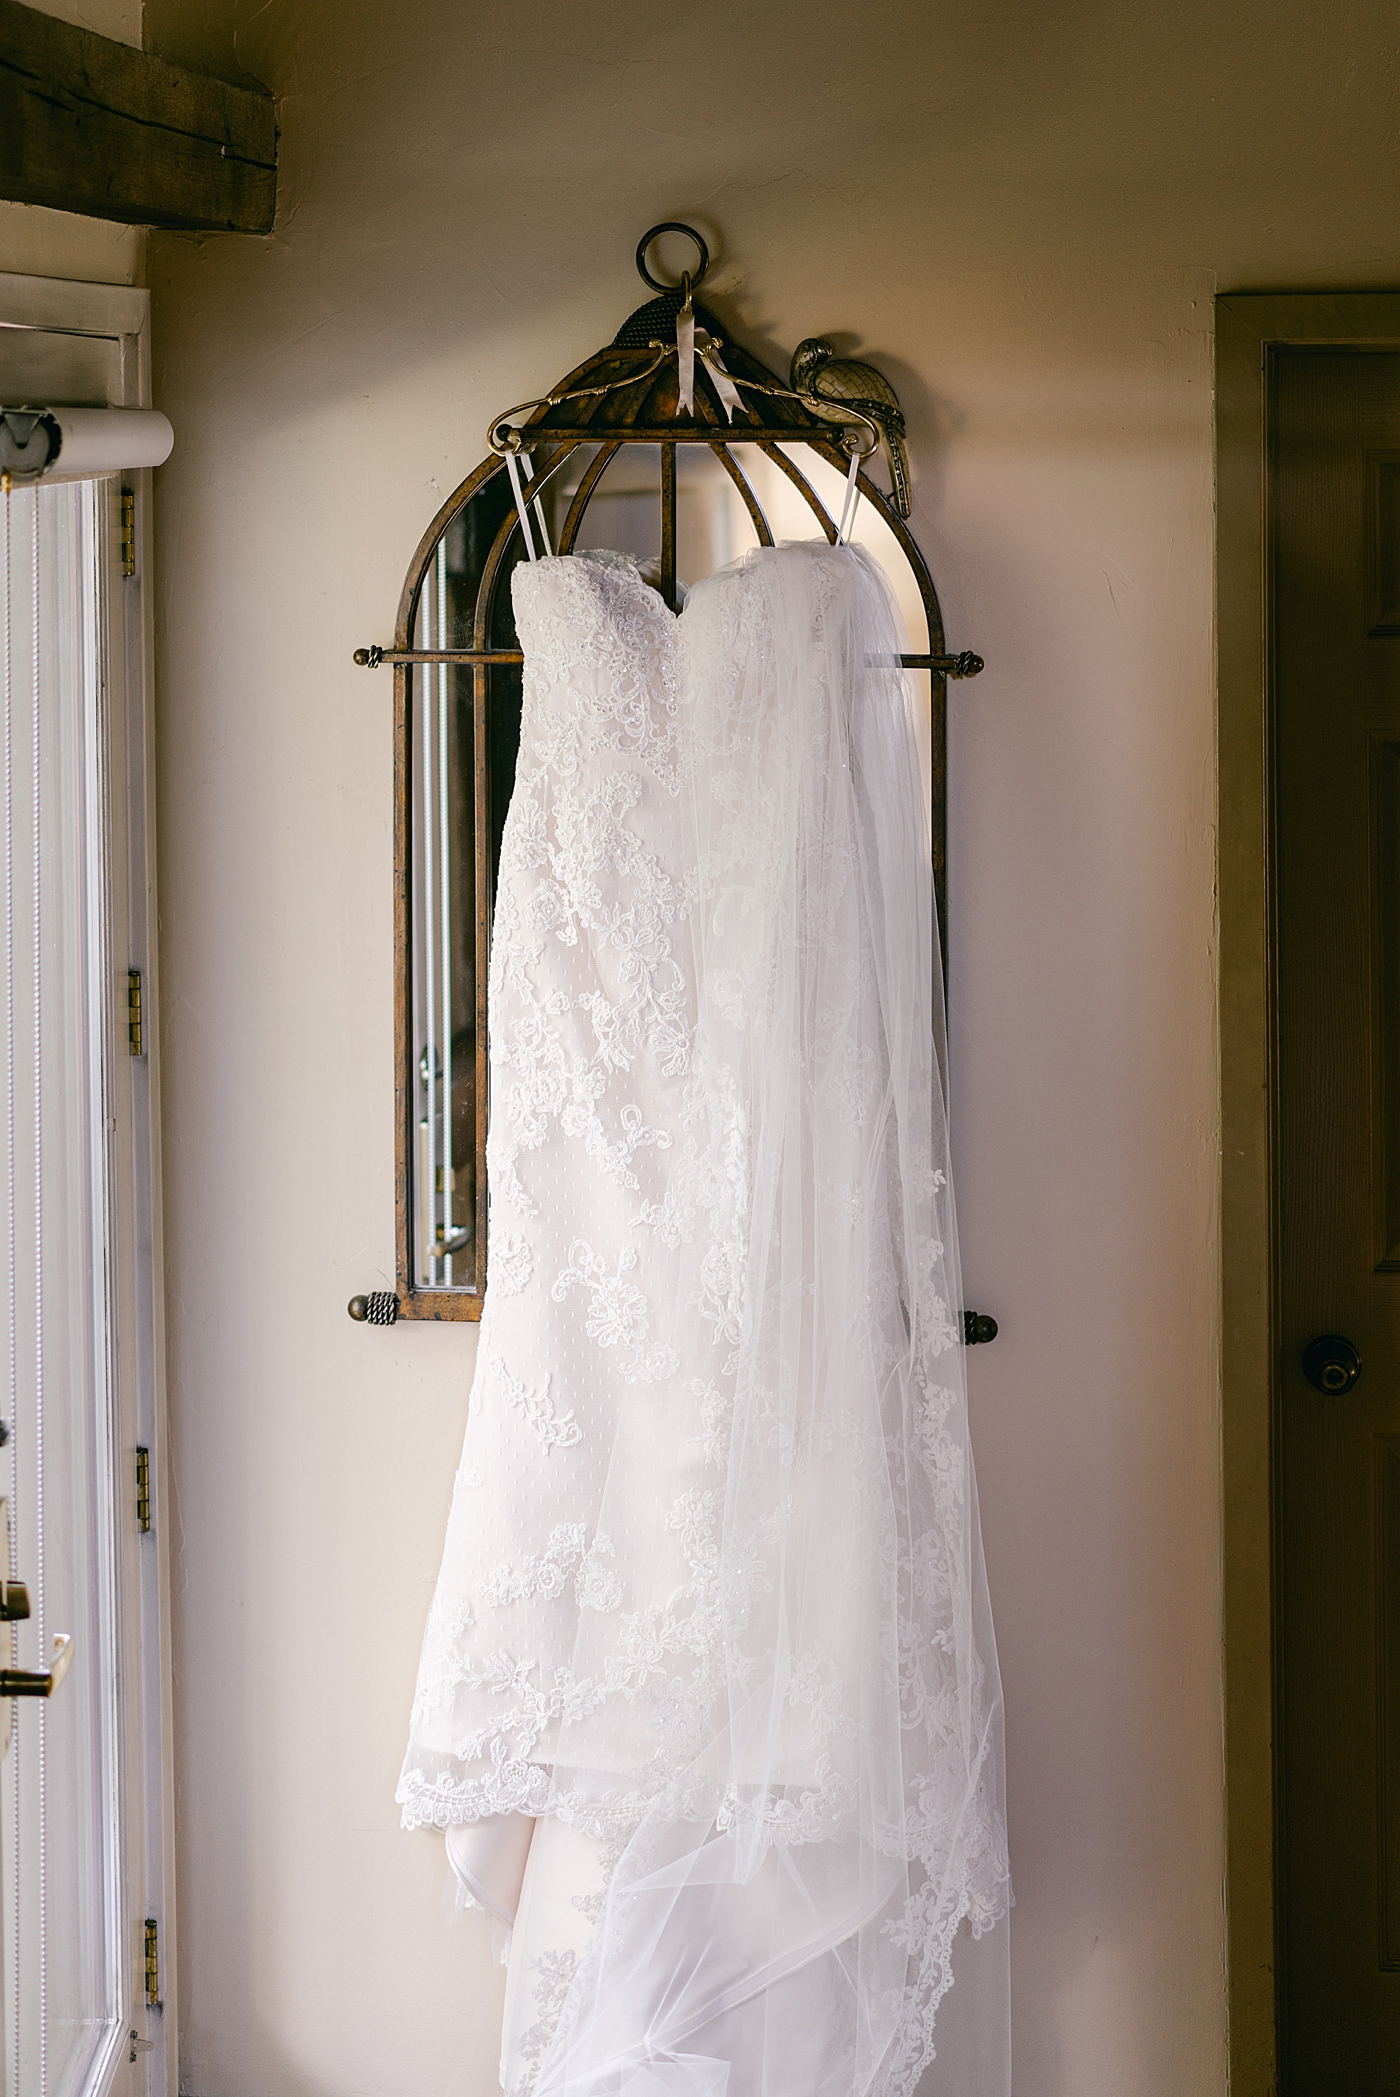 Lace bridal gown hanging on a mirror | Photo by Hope Helmuth Photography